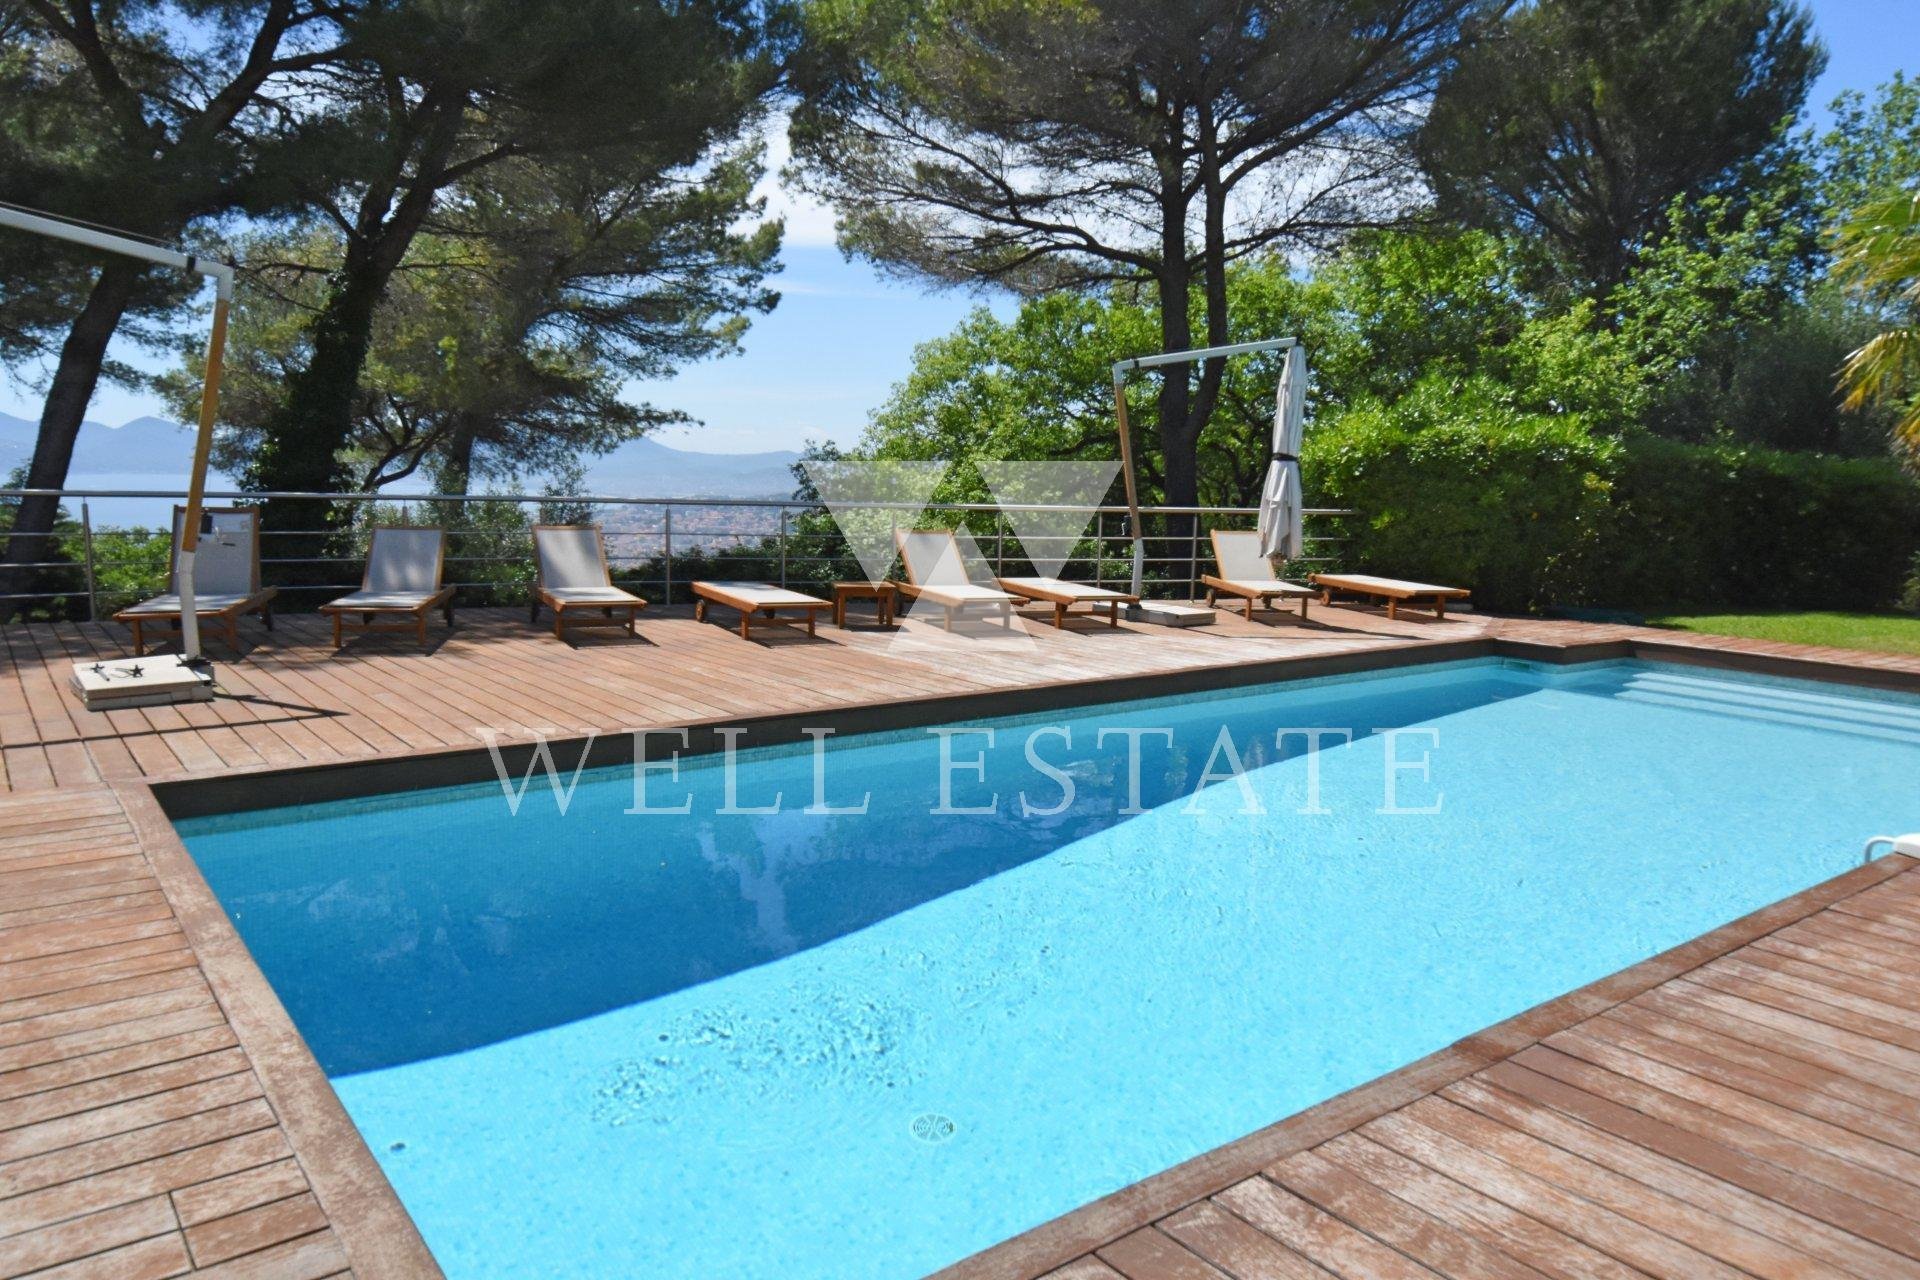 SUPER CANNES VILLA 270M2 8 ROOMS HEATED SWIMMING POOL SEA VIEW